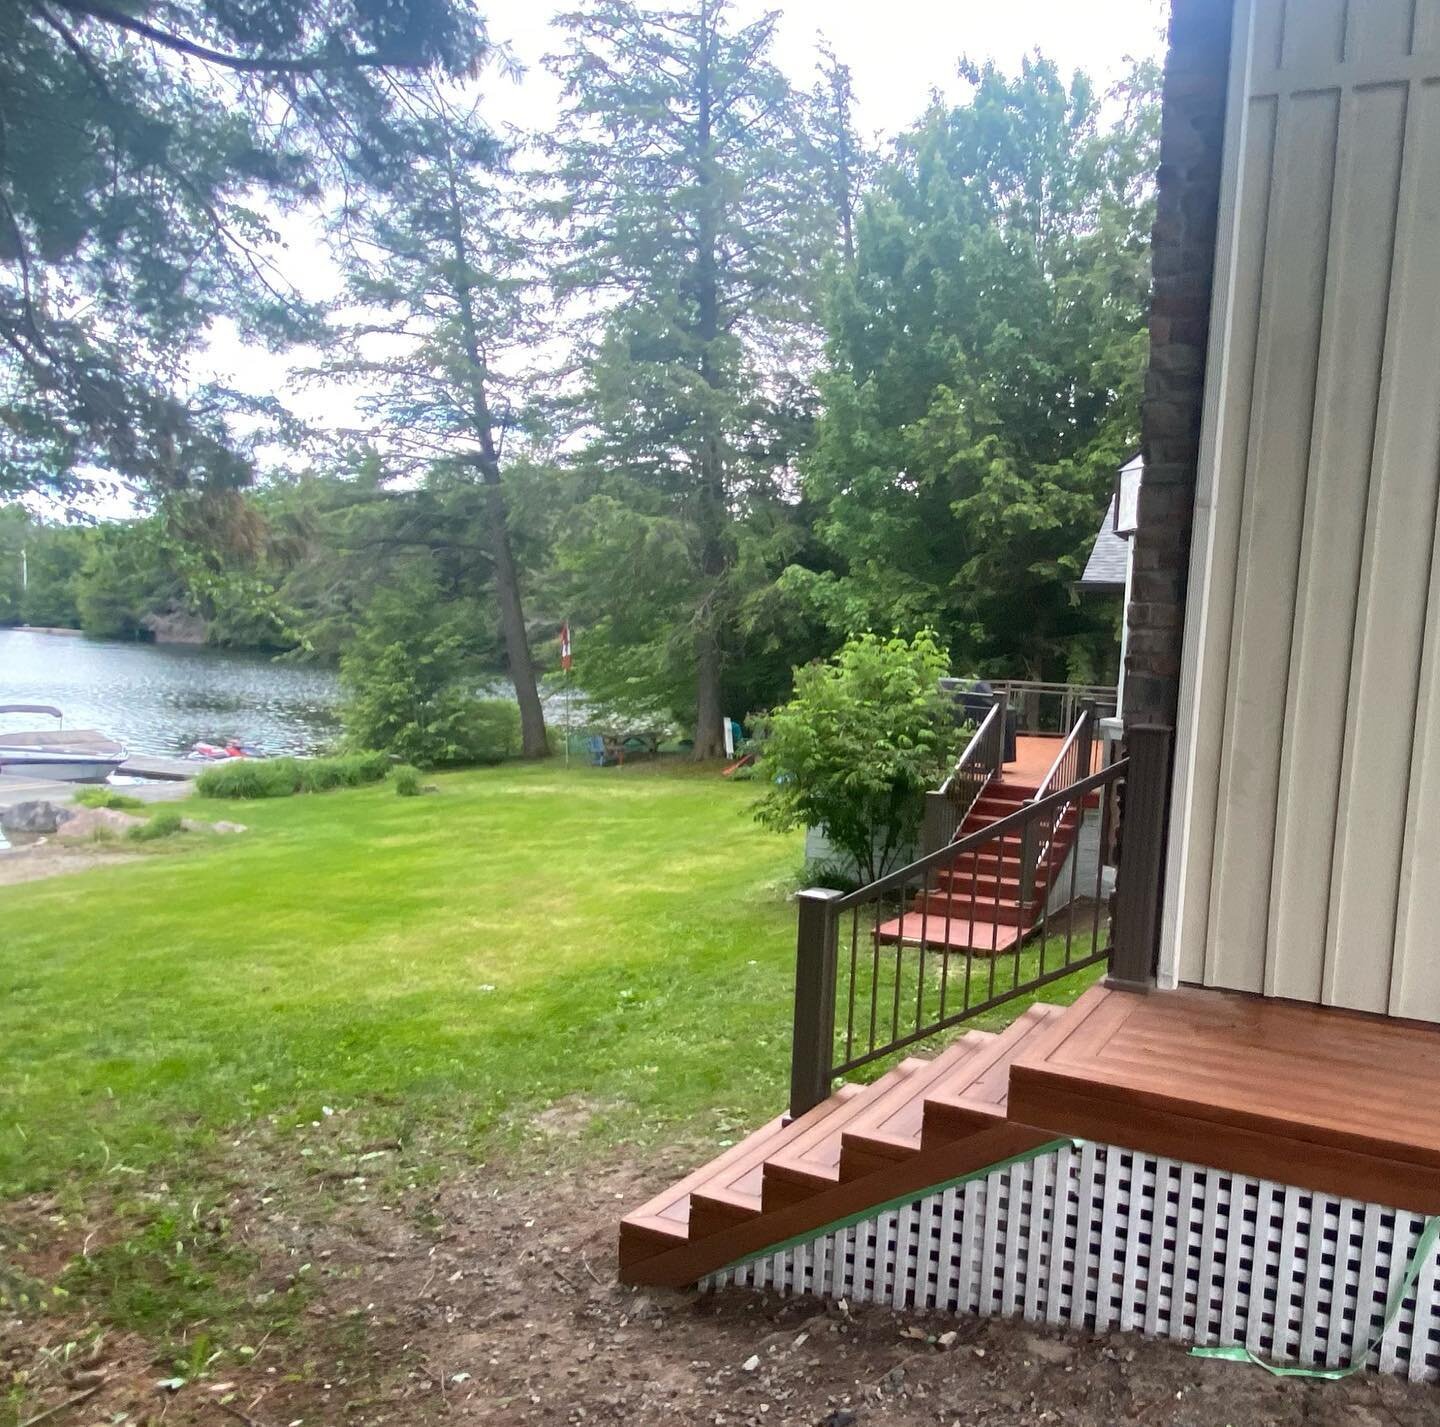 👉🏻 Swipe left to see the before and after of this railing installation in cottage country. 🚤🌊🪵🔥⛺️

#lifeofacontractor #homereno #customhomes #builditbetter #reno #renovation #torontobuilds #design #lanewayhouse #custombuild #masterbath #constru